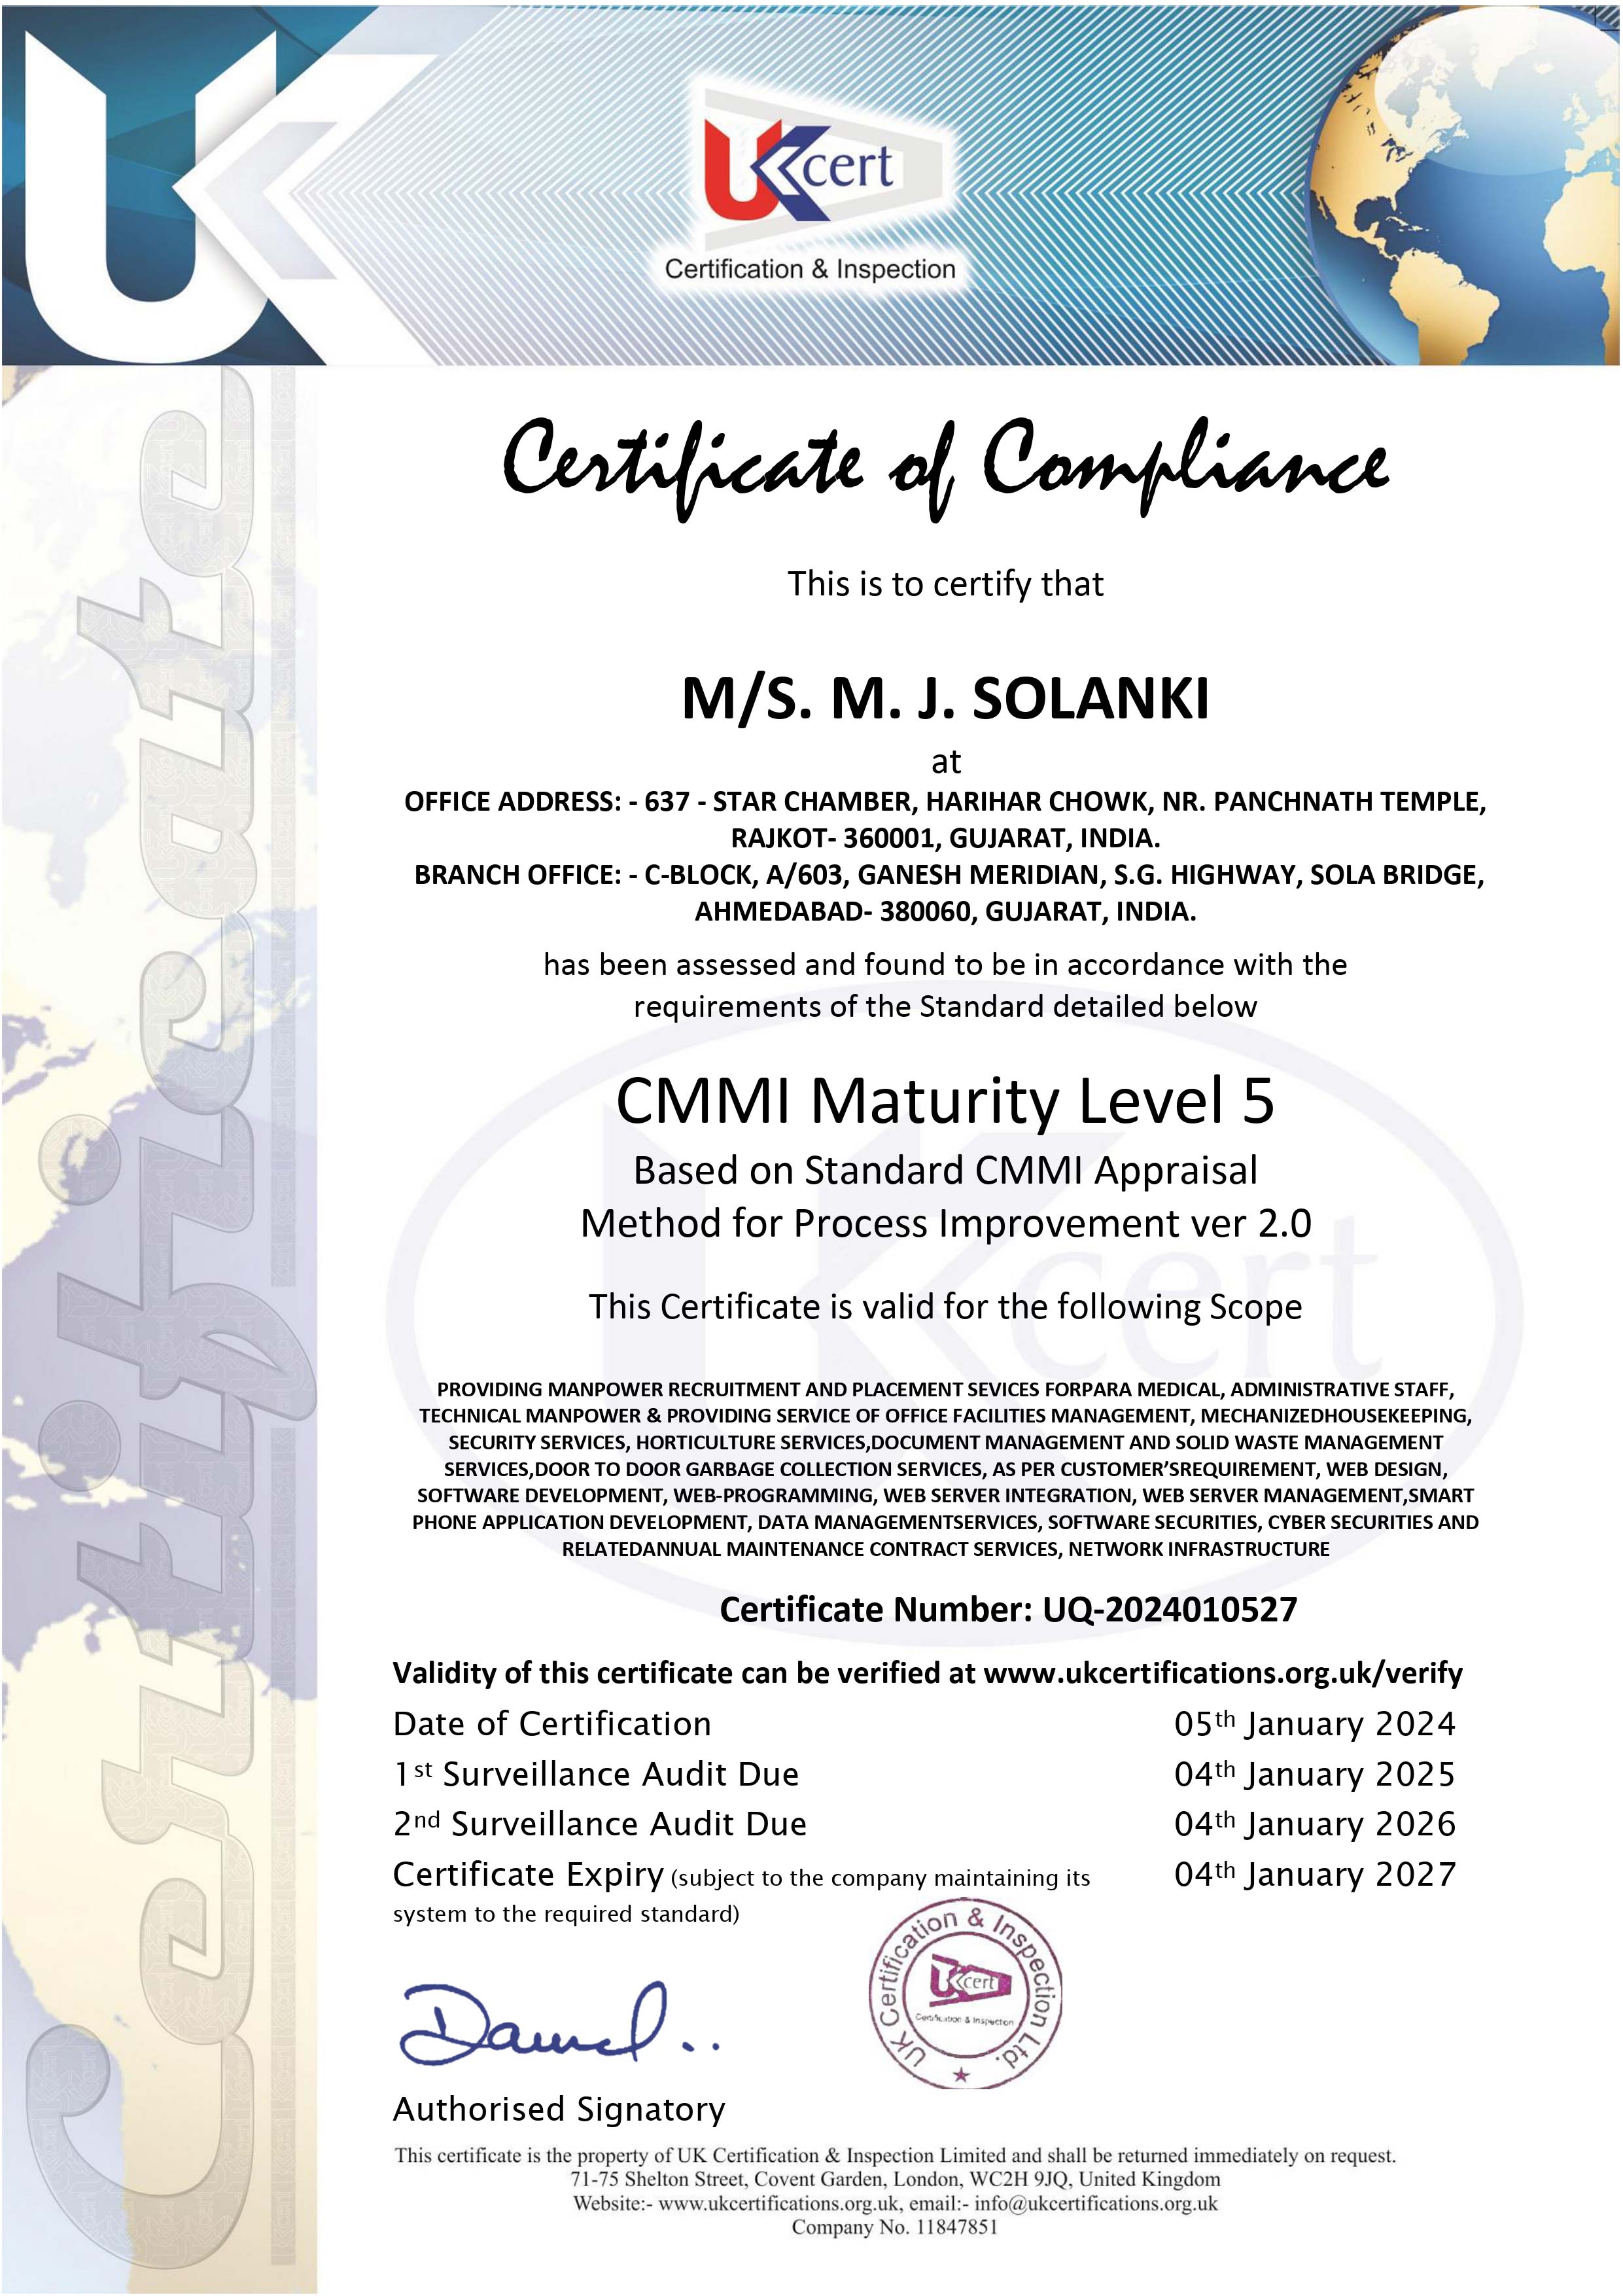 Certificate of Compliance Image